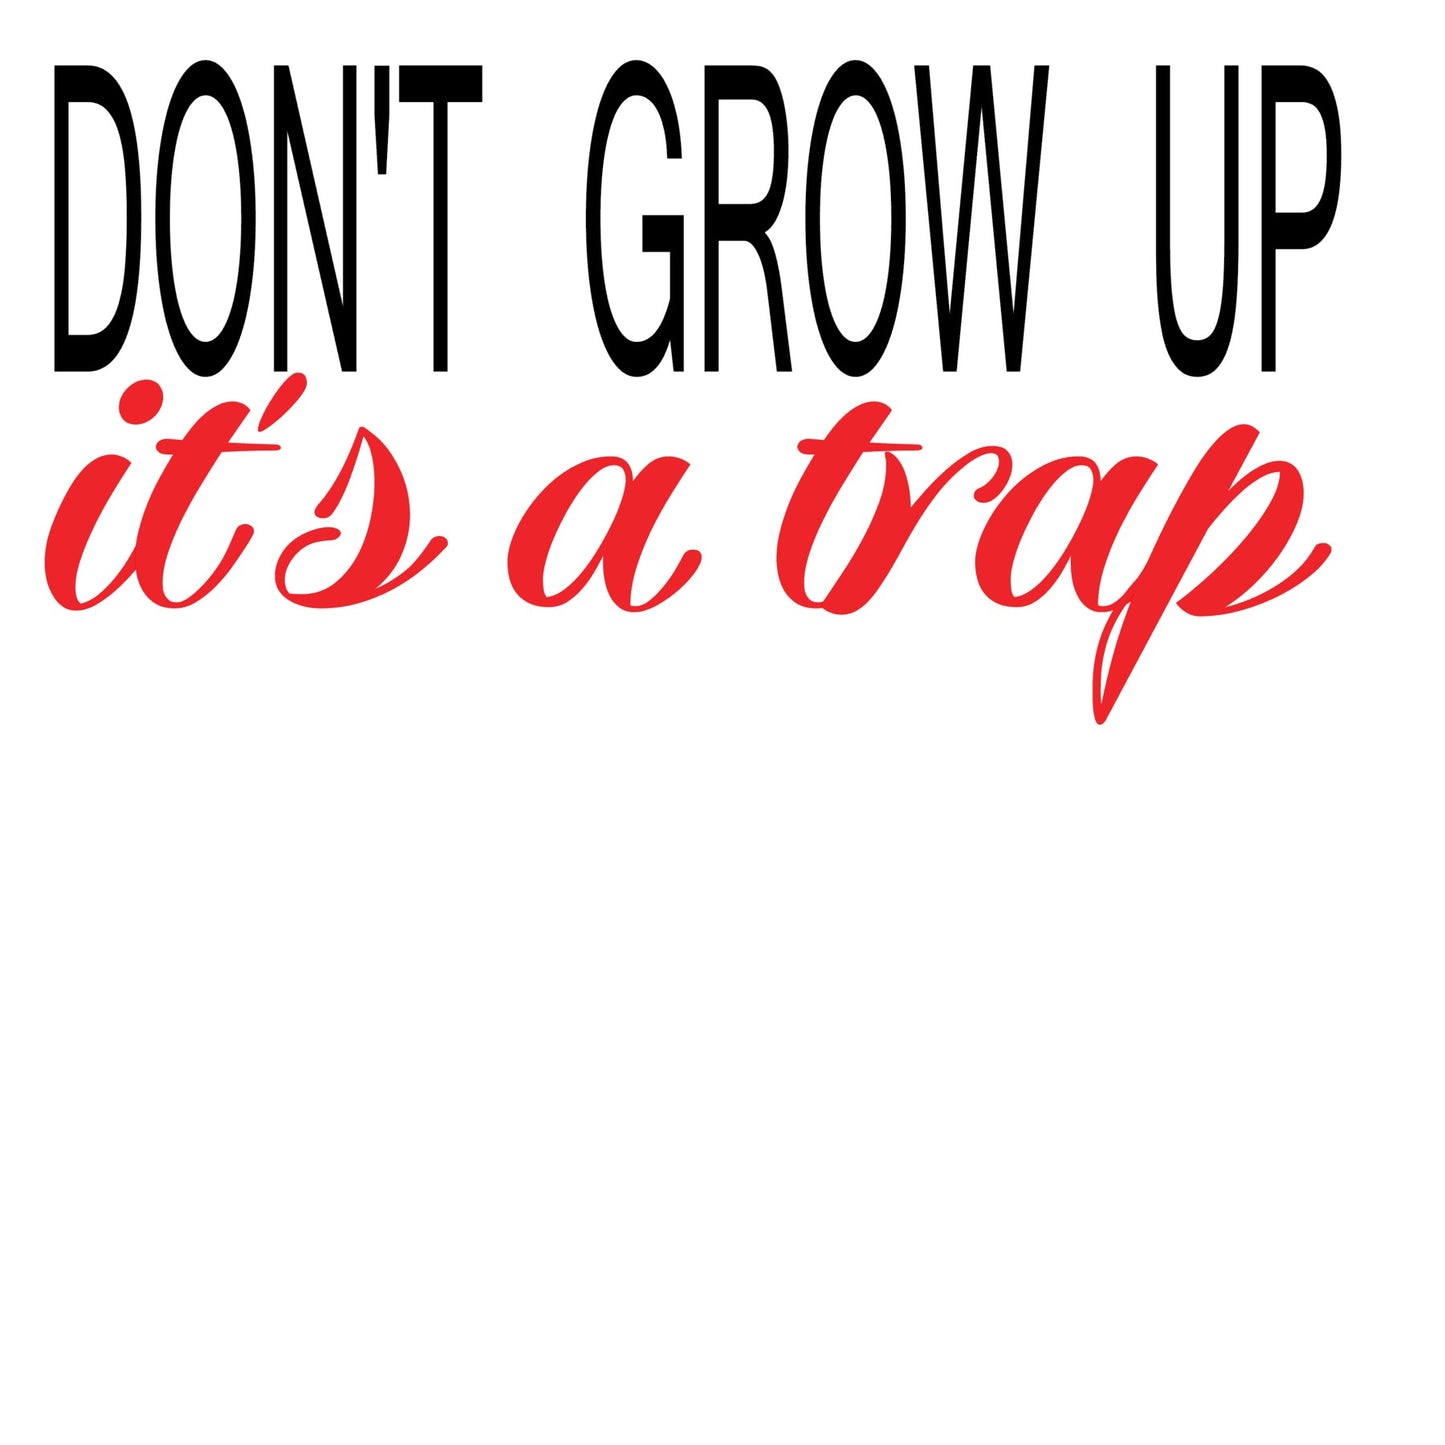 Don't Grow Up It's A Trap